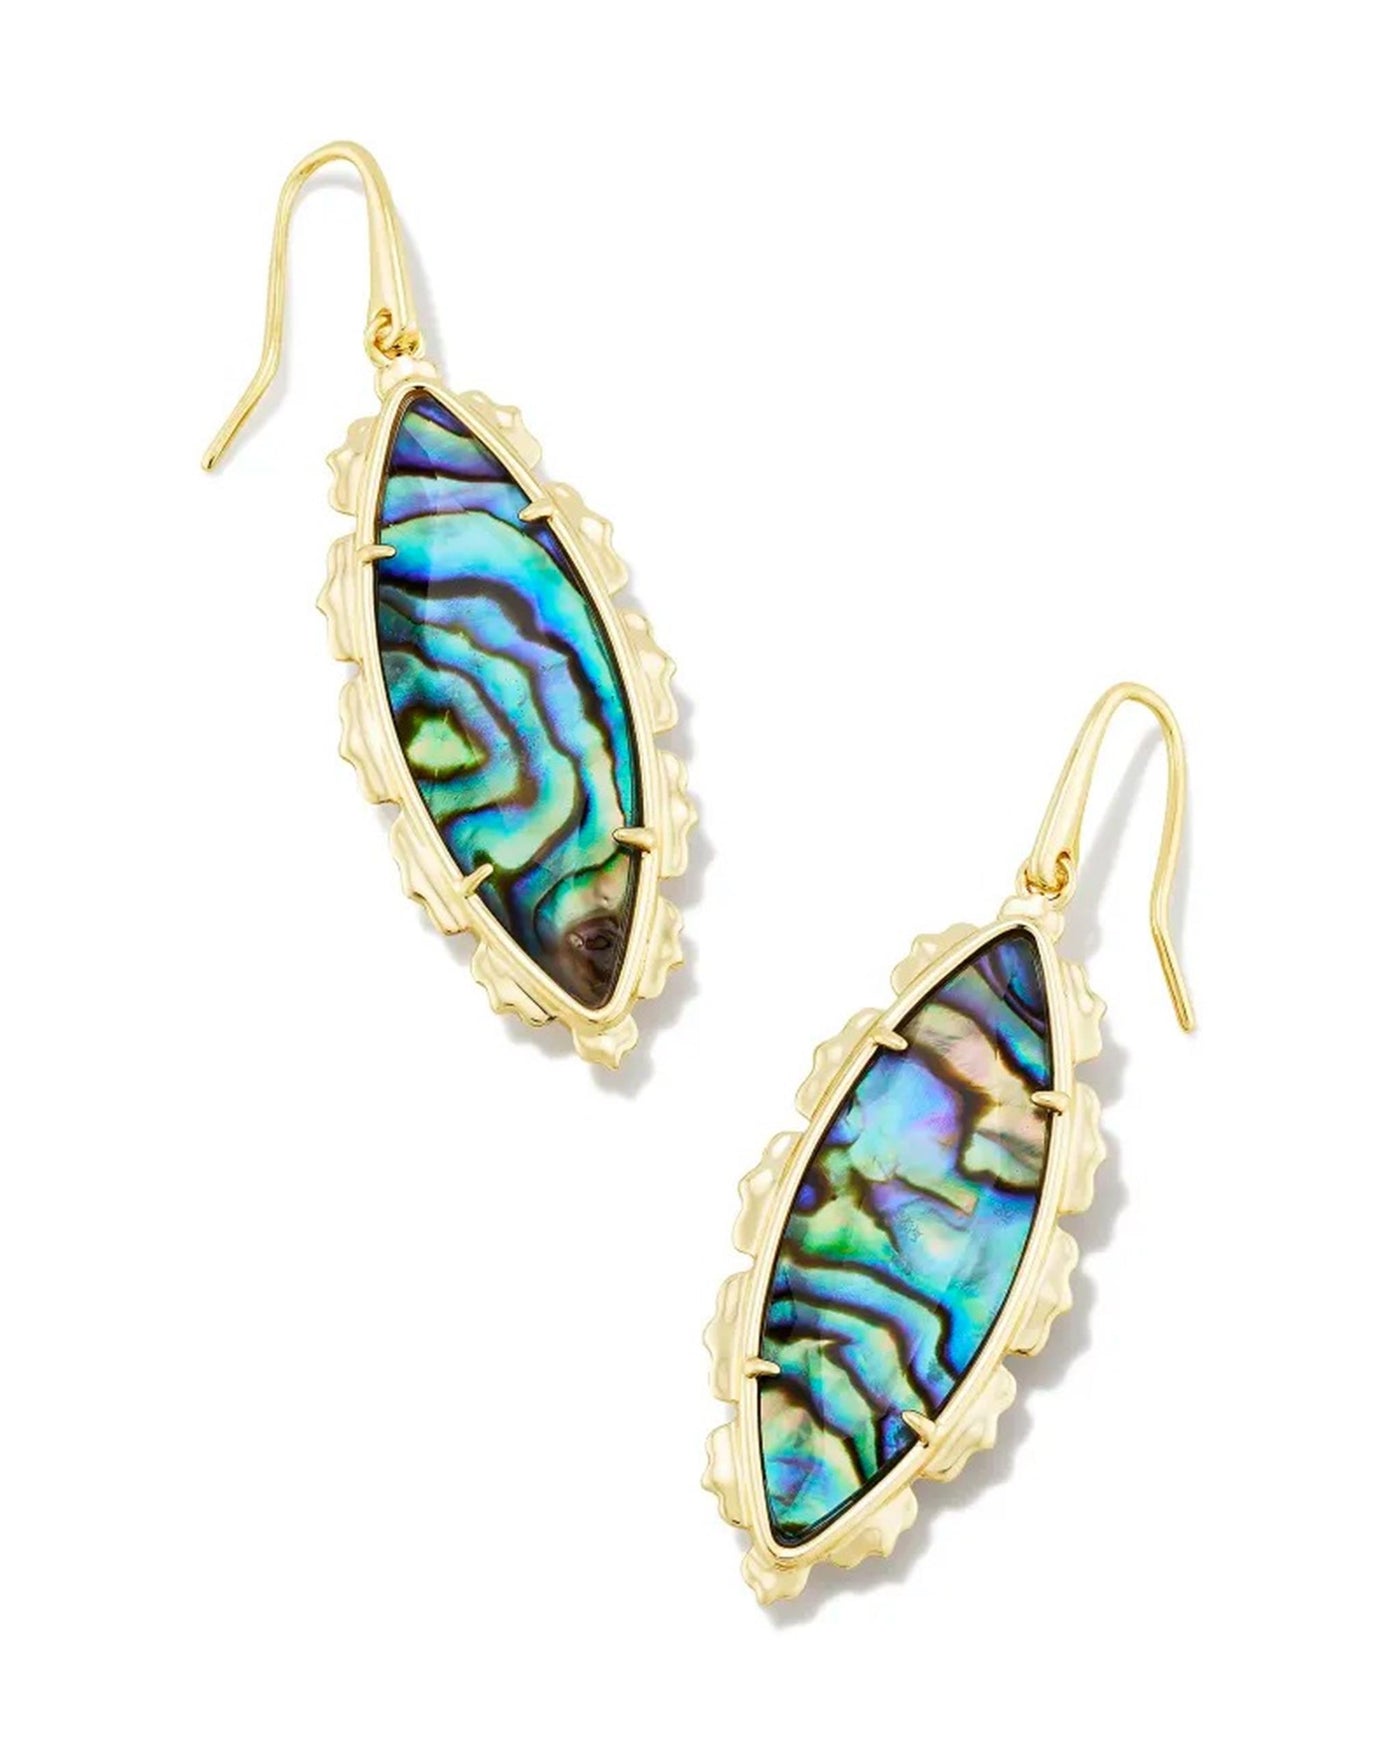 Gold Tone Earrings Featuring Dichroic Abalone by Kendra Scott